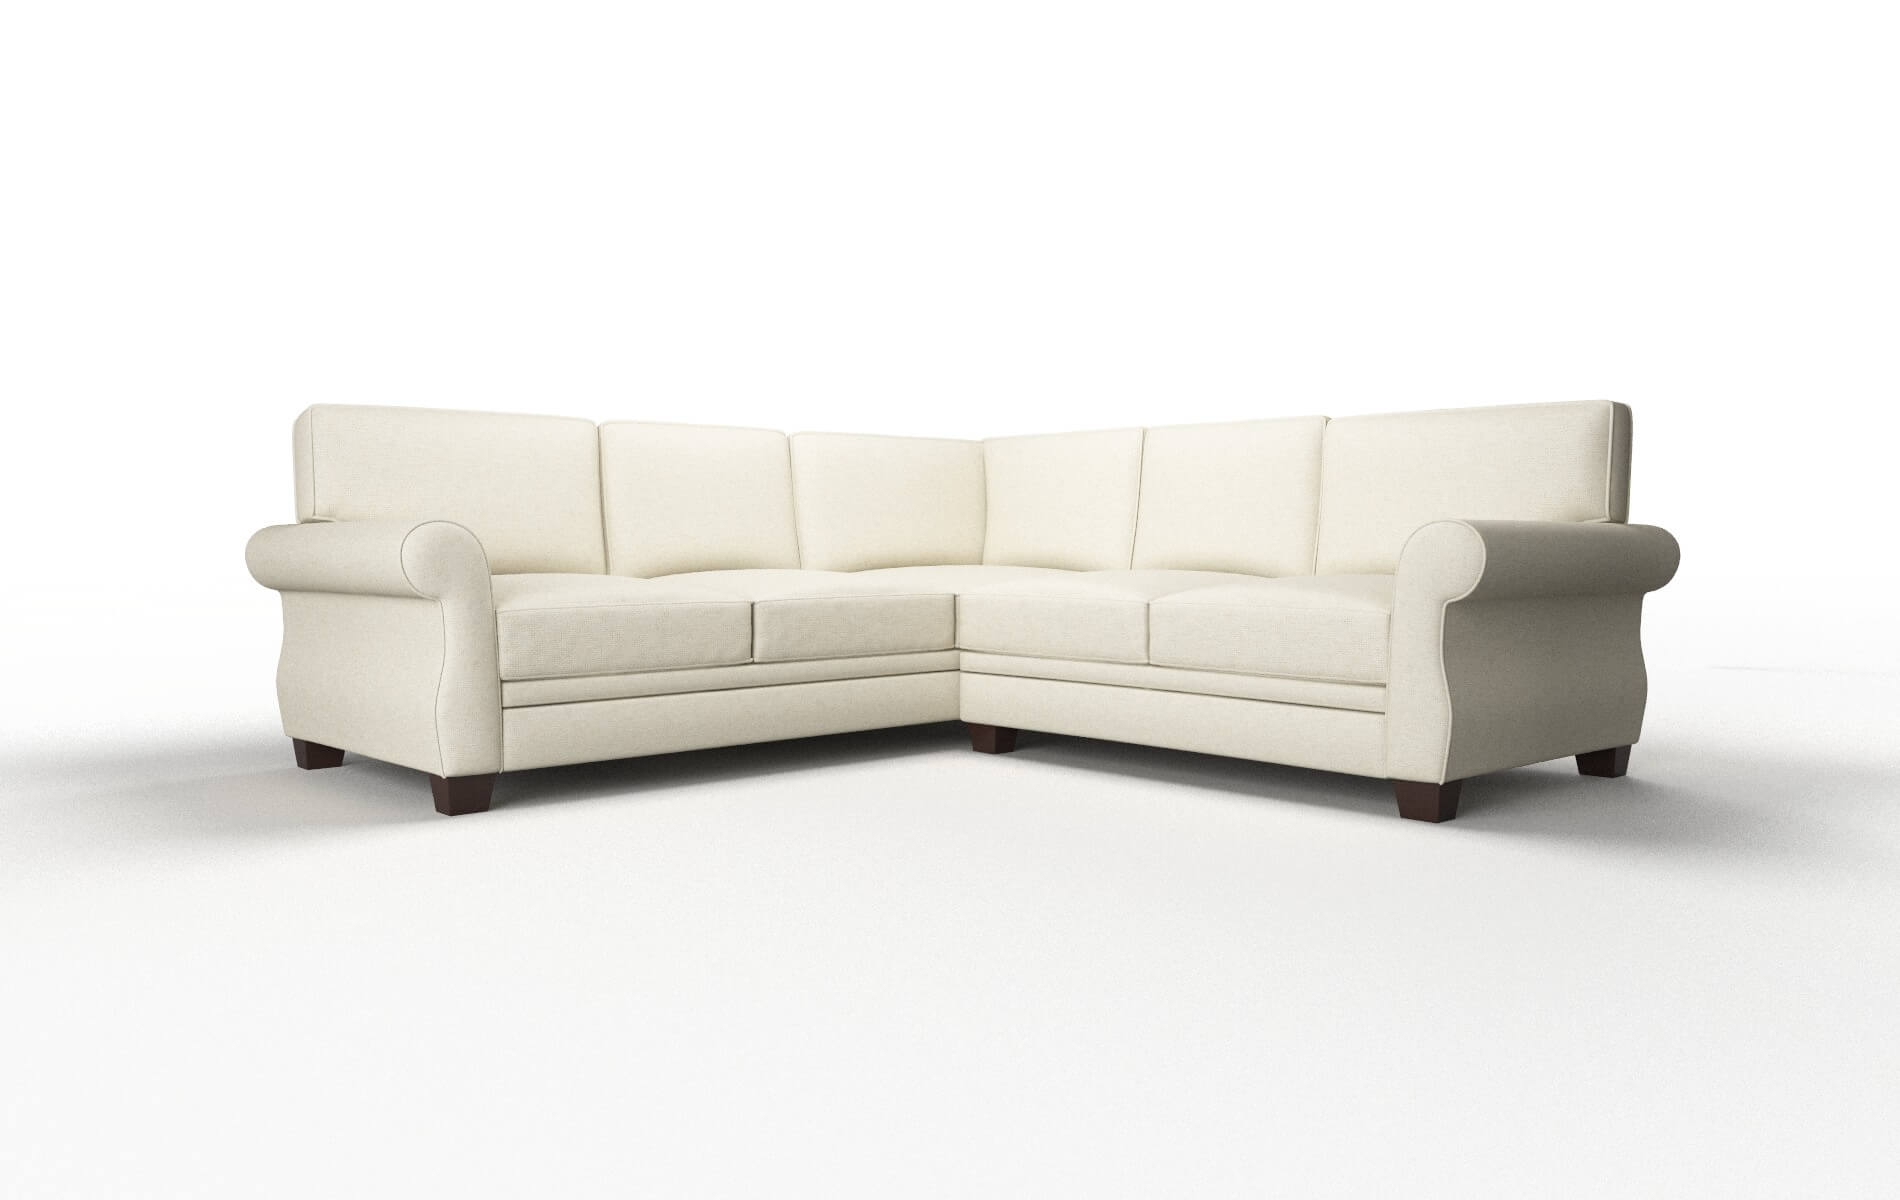 Rome Redondo Oyster Sectional espresso legs 1